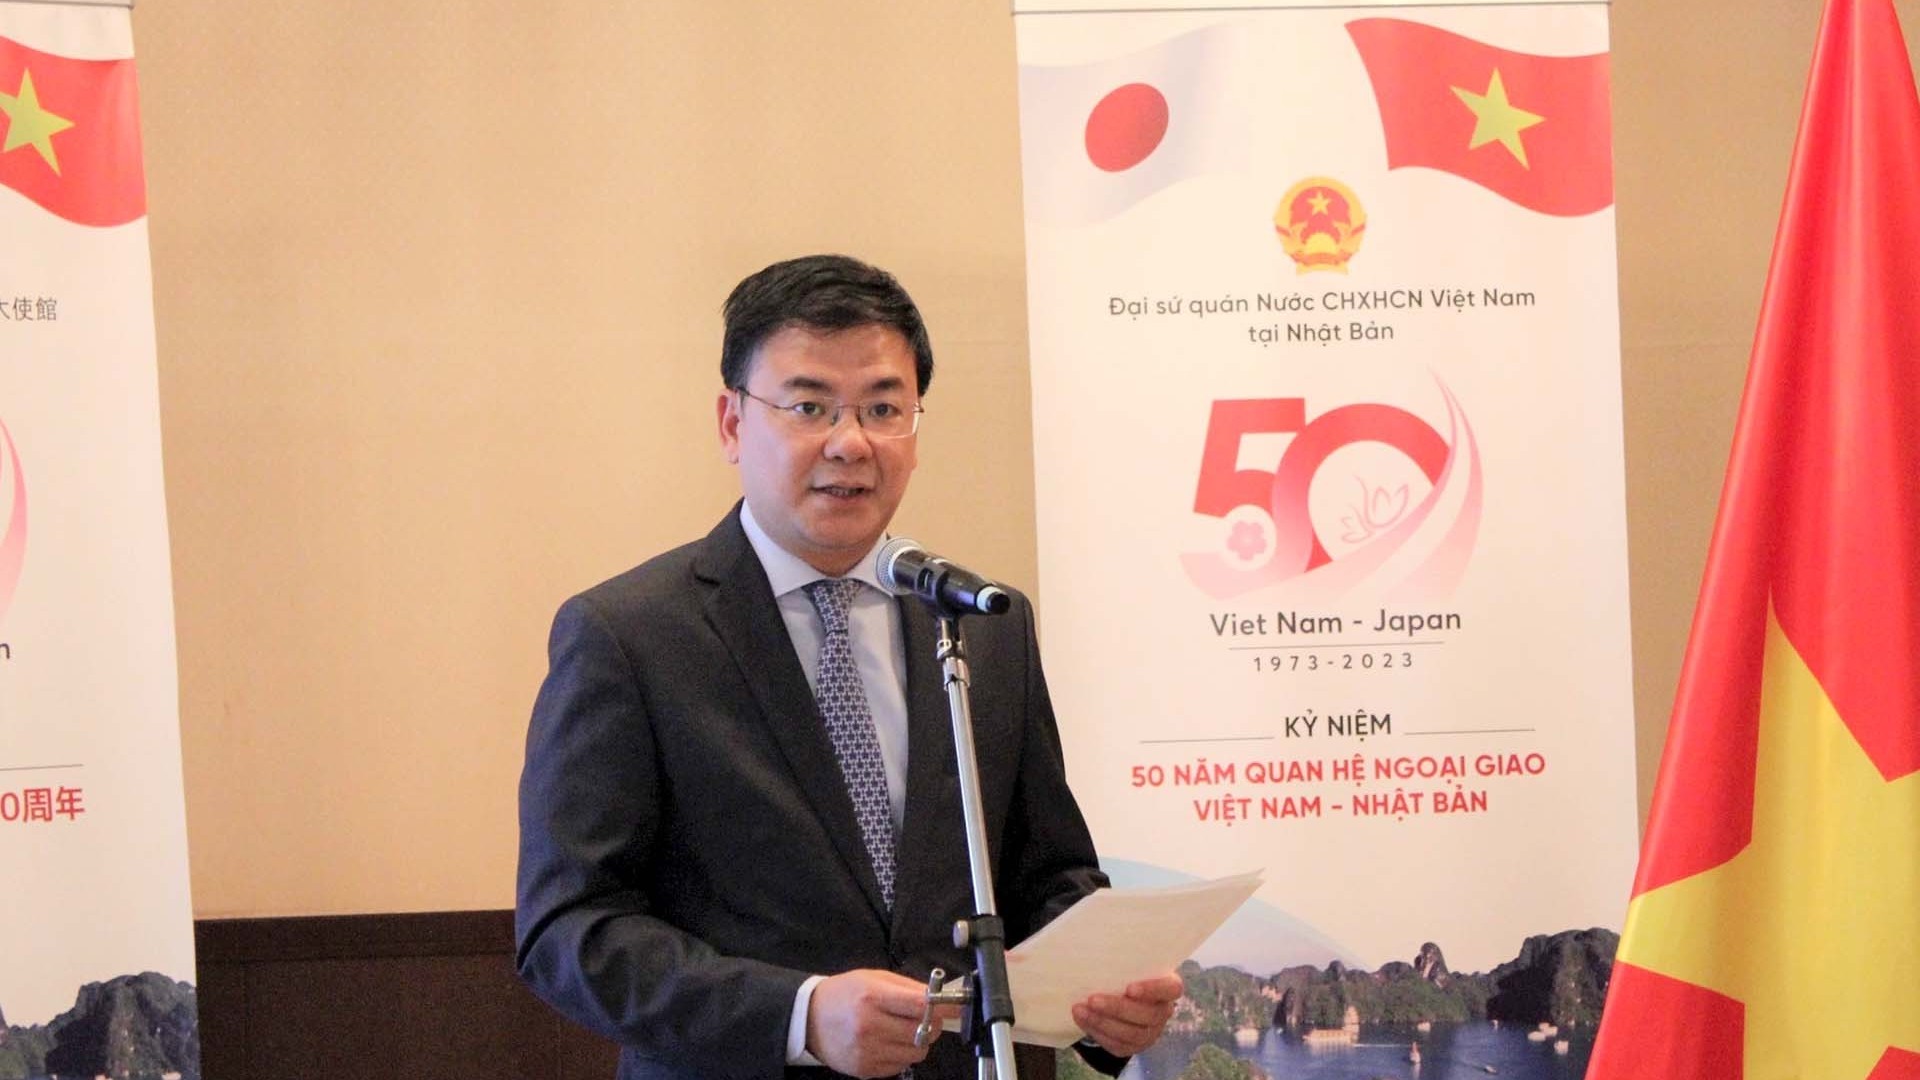 The visit opens new page for Vietnam - Japan relations: Ambassador